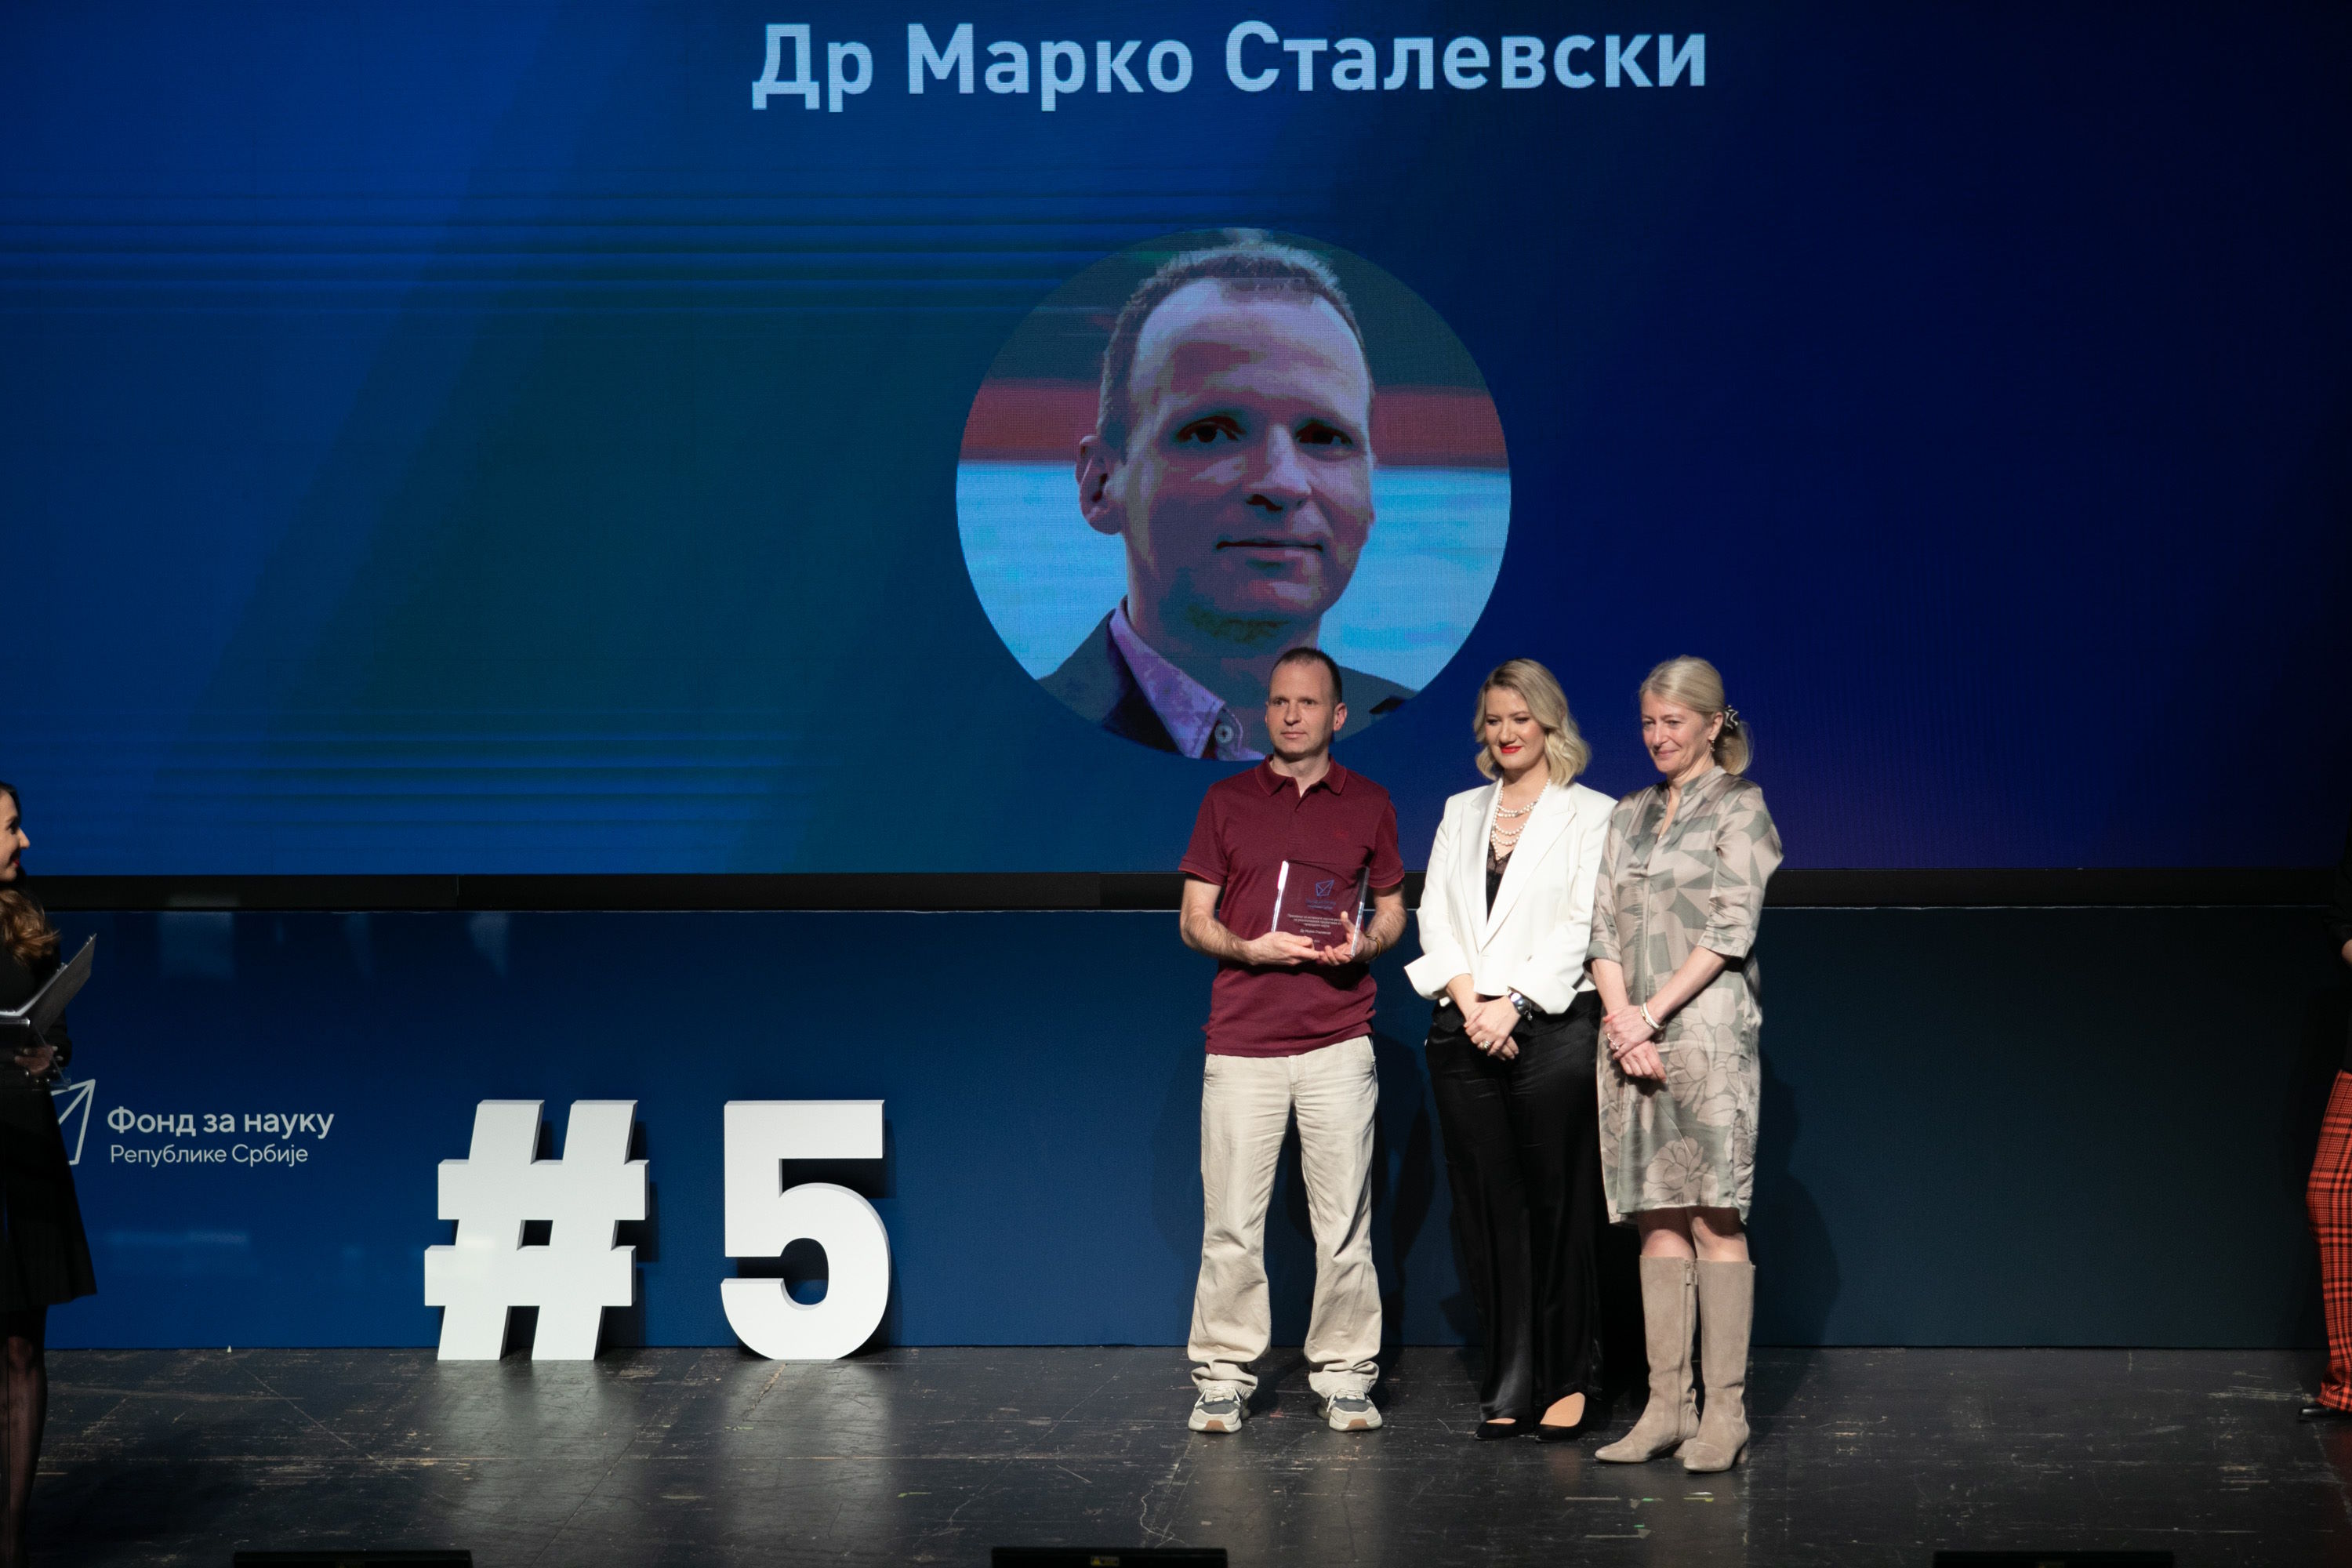 Dr Marko Stalevski Receives Recognition for Outstanding Contribution to Science